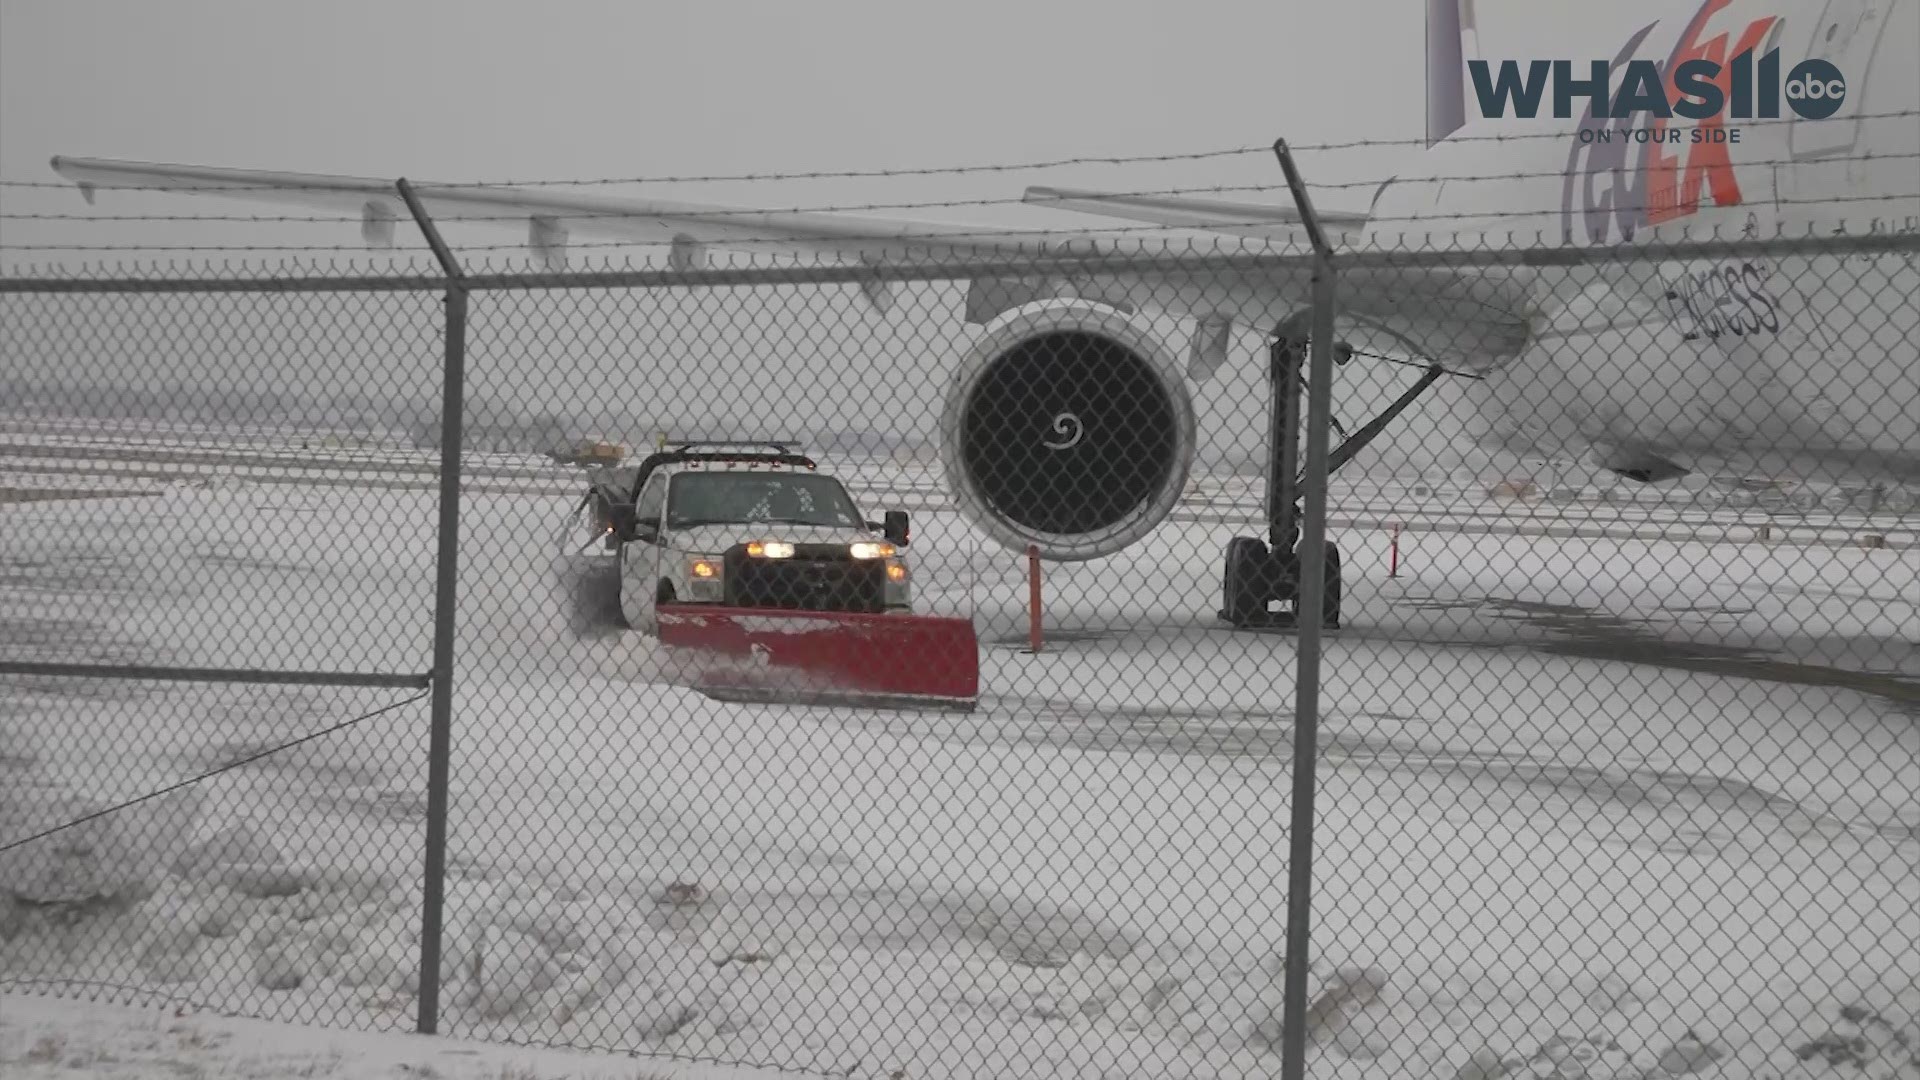 As heavy snow fell during the winter storm, workers at the airport removed snow by plows at the airport.